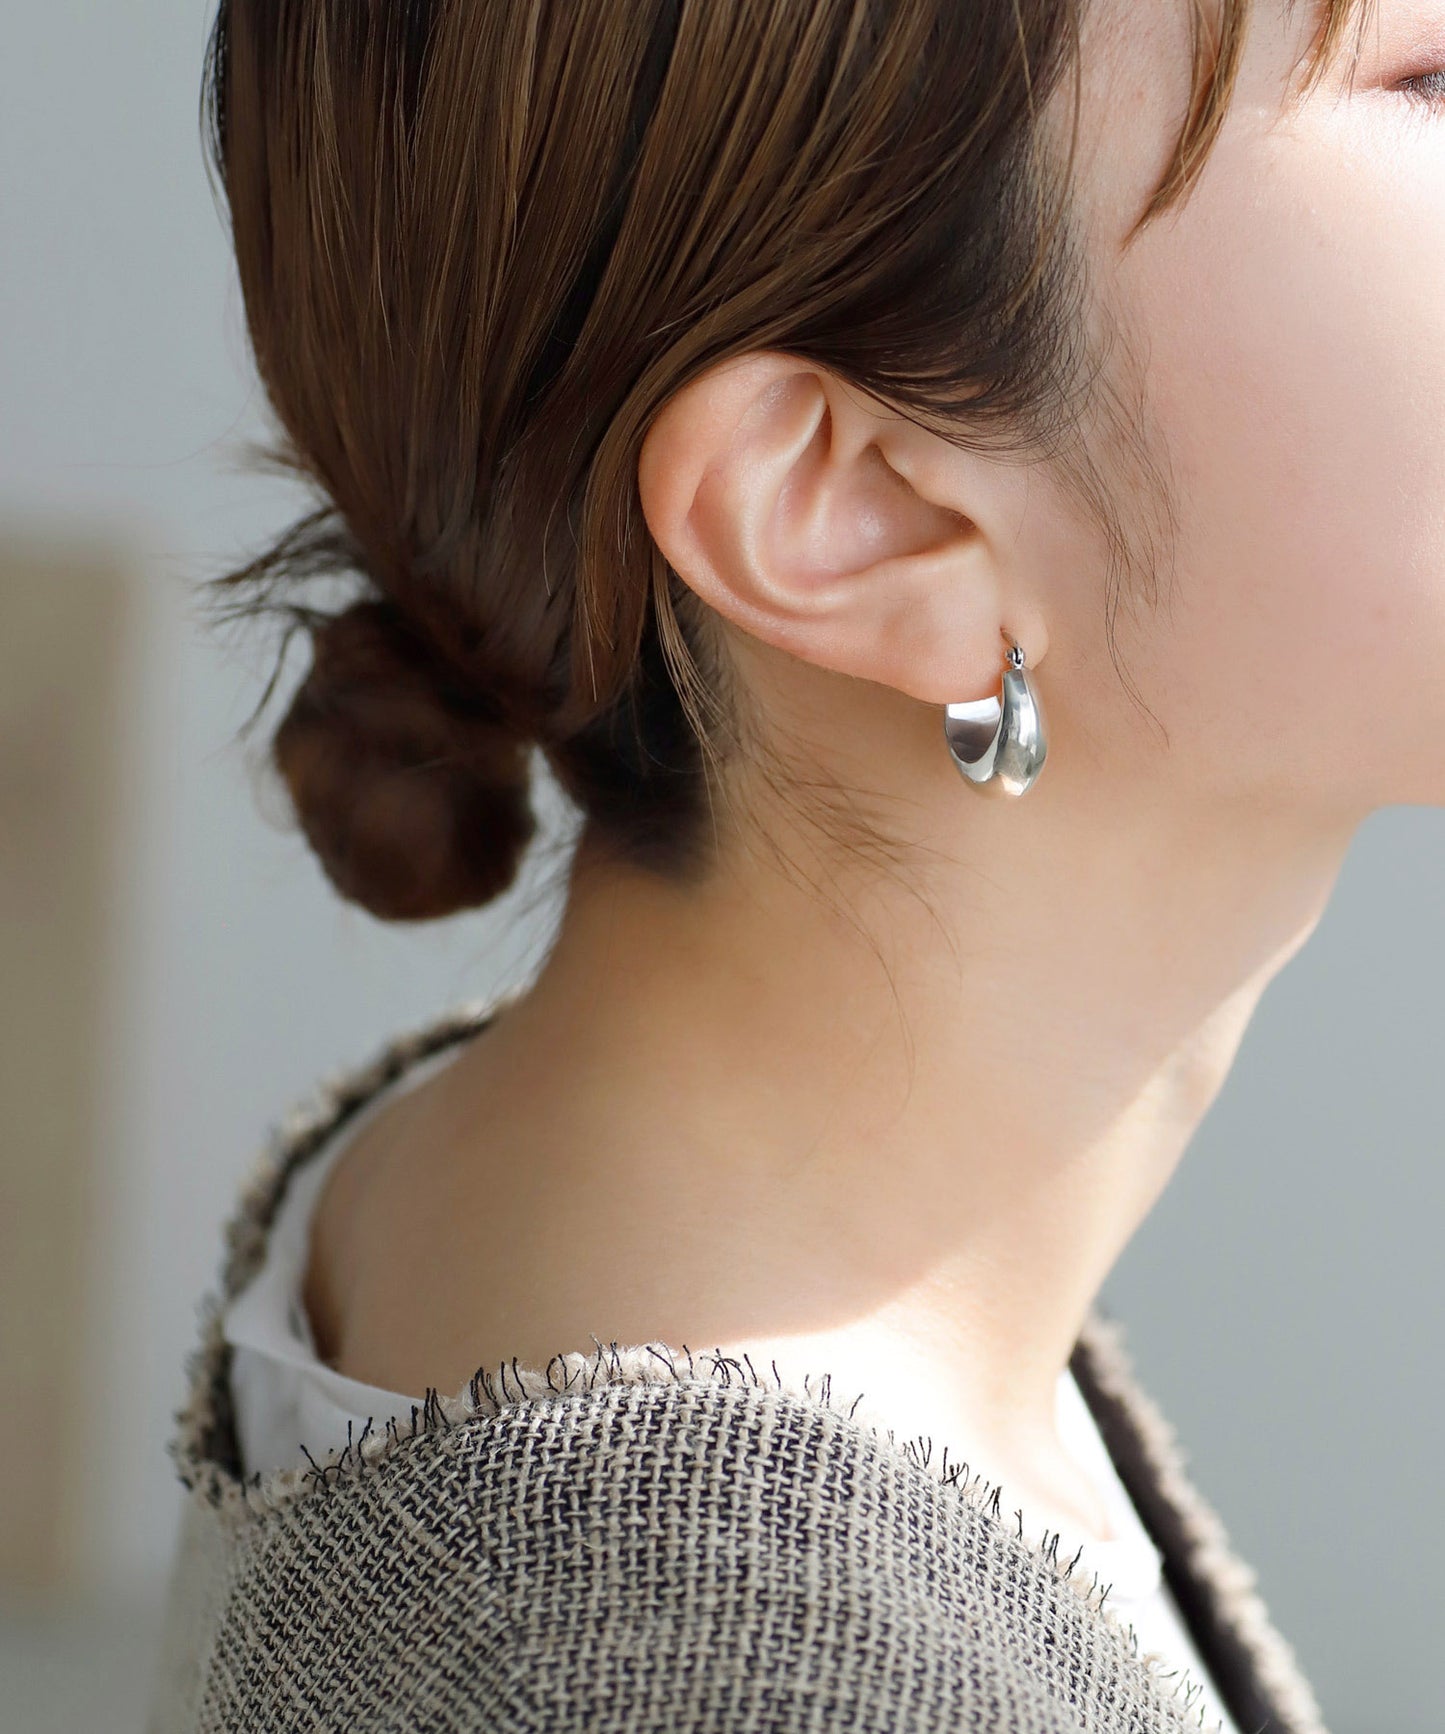 【Eligible for Novelty】Vintage Earrings [925 silver][D]